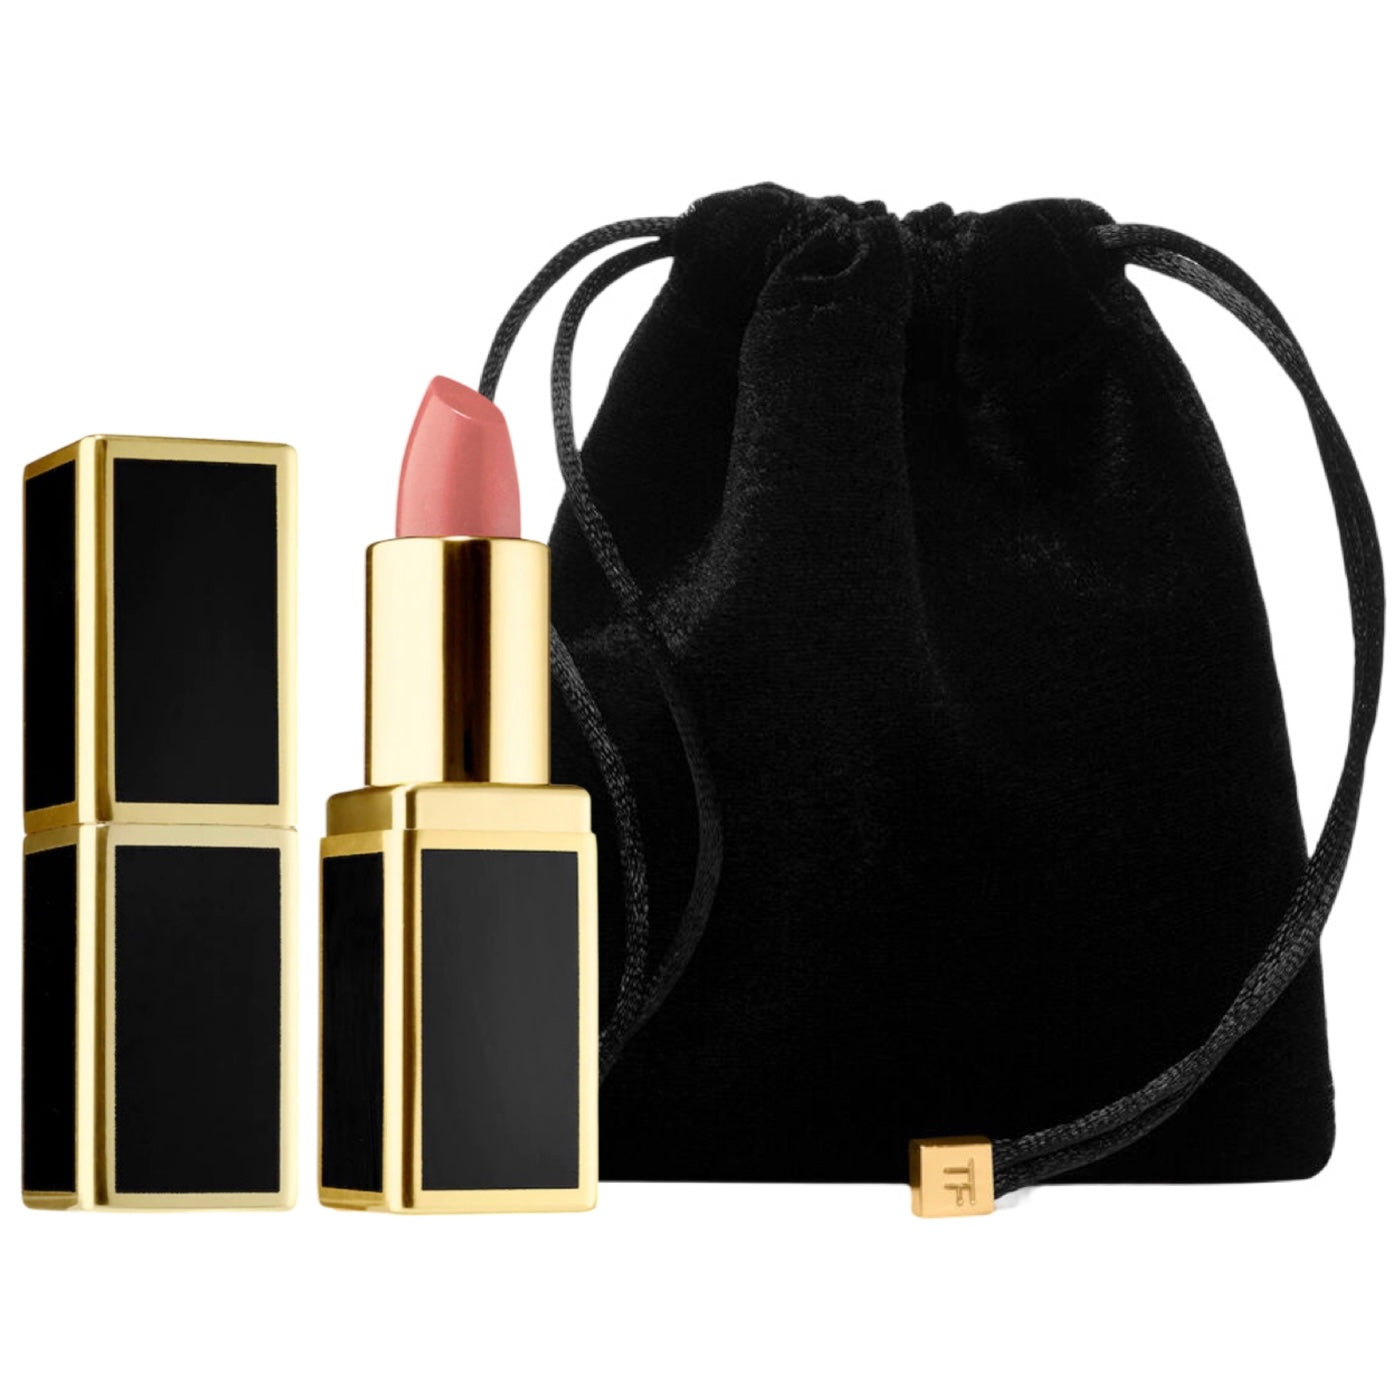 Tom Ford Mini Lip Color in 04 Indian Rose – VanityGloss